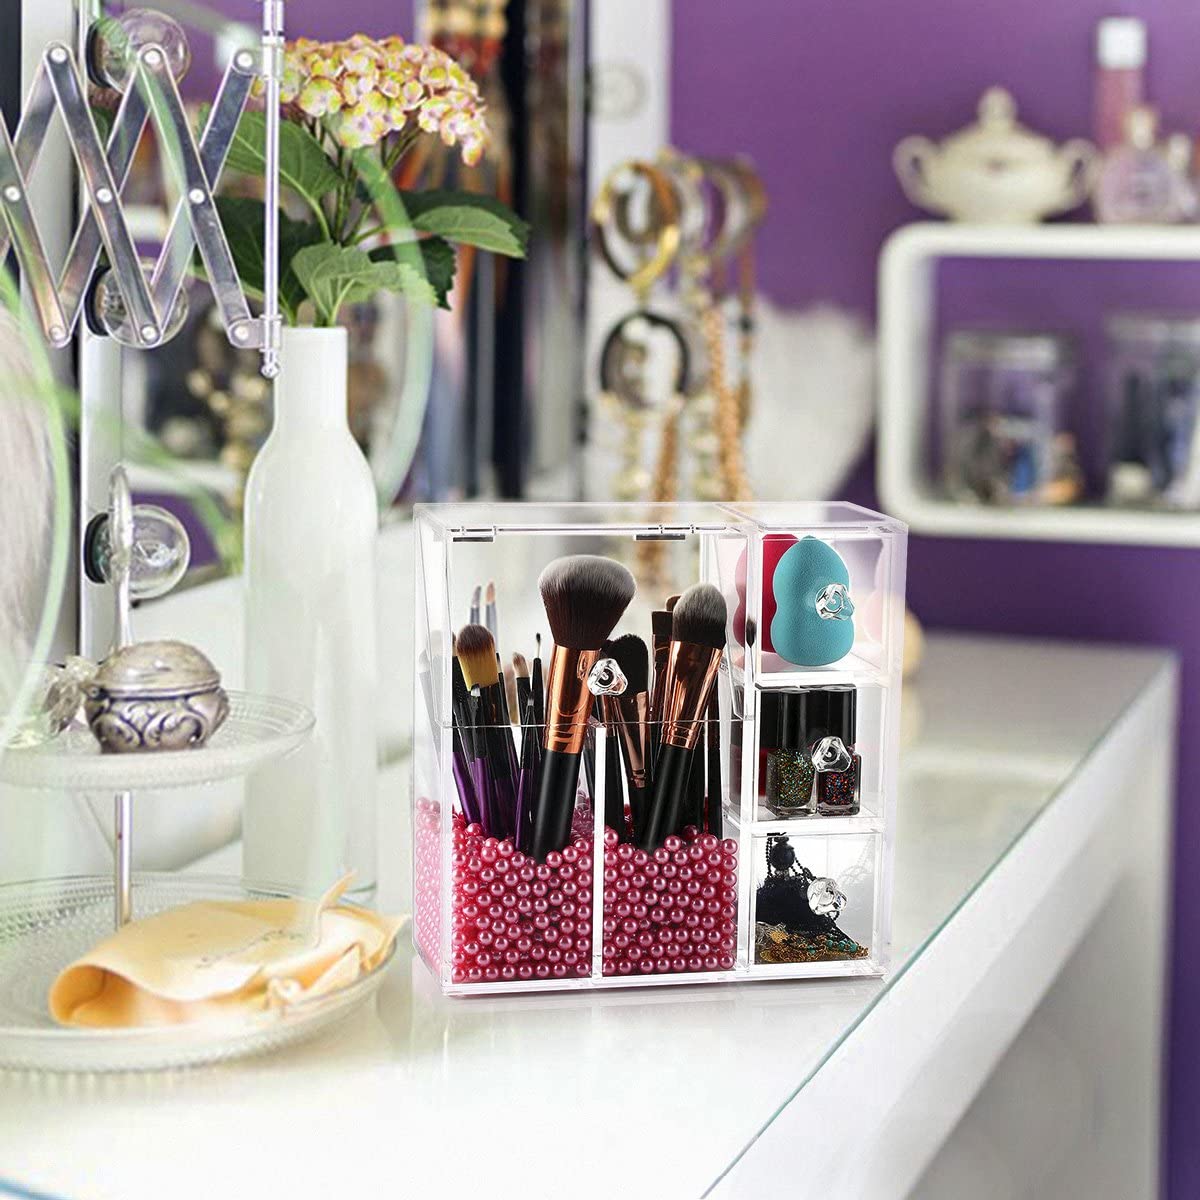 HBlife Makeup Brush Holder, Acrylic Makeup Organizer with 2 Brush Holders and 3 Drawers Dustproof Box